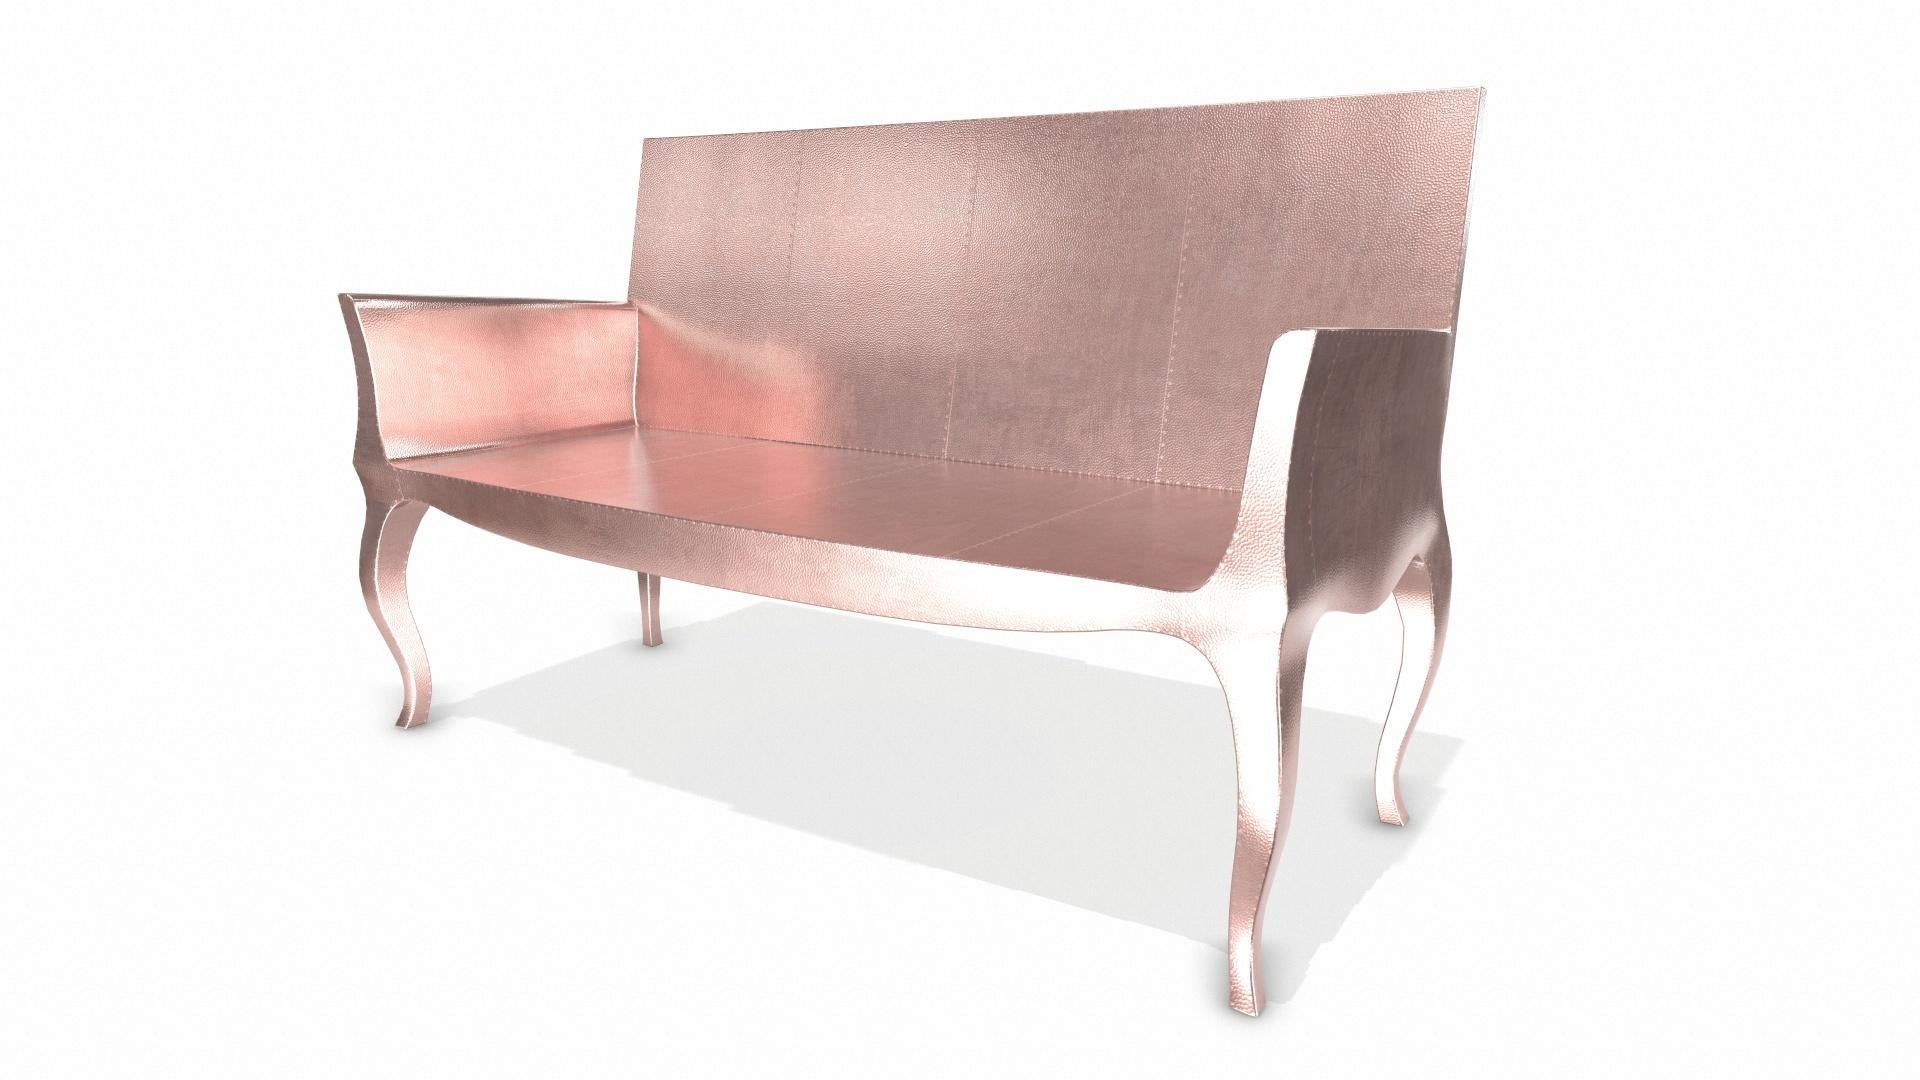 American Louise Settee Art Deco Chaise Longues  in Mid. Hammered Copper by Paul Mathieu For Sale